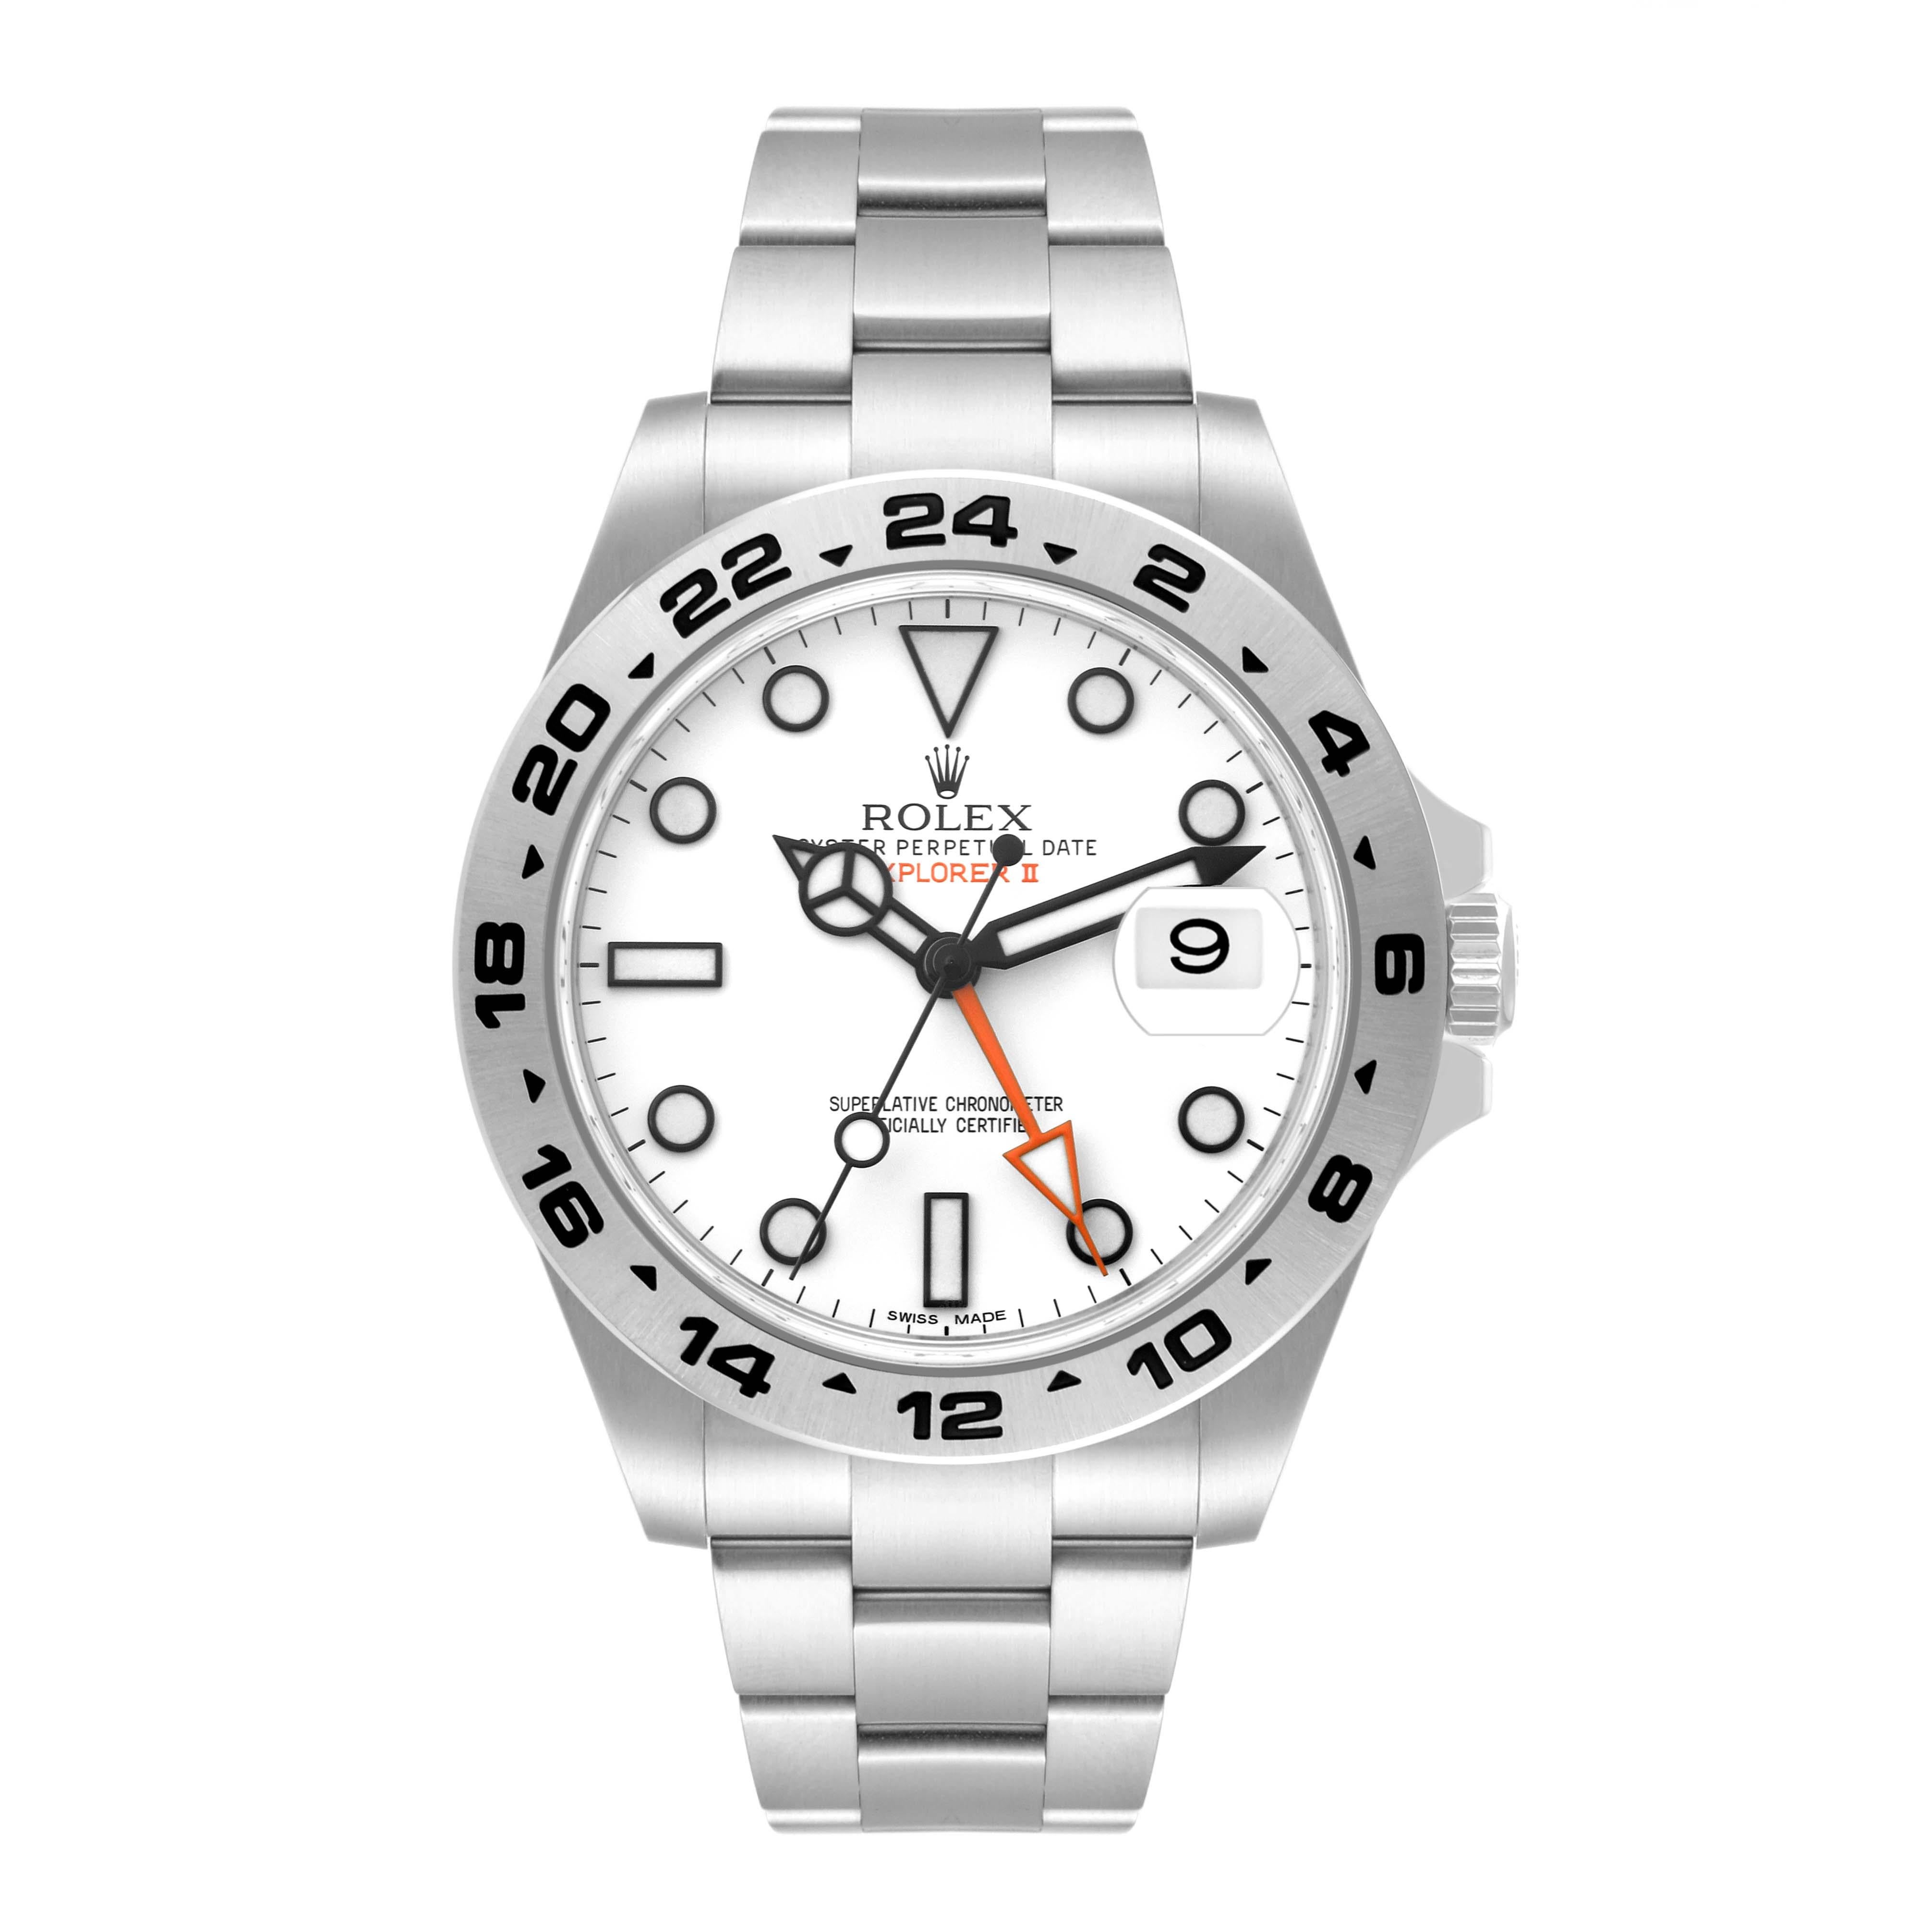 Rolex Explorer II White Dial Orange Hand Steel Mens Watch 216570 Box Card. Officially certified chronometer automatic self-winding movement. Stainless steel case 42.0 mm in diameter. Rolex logo on the crown. Stainless steel bezel with engraved